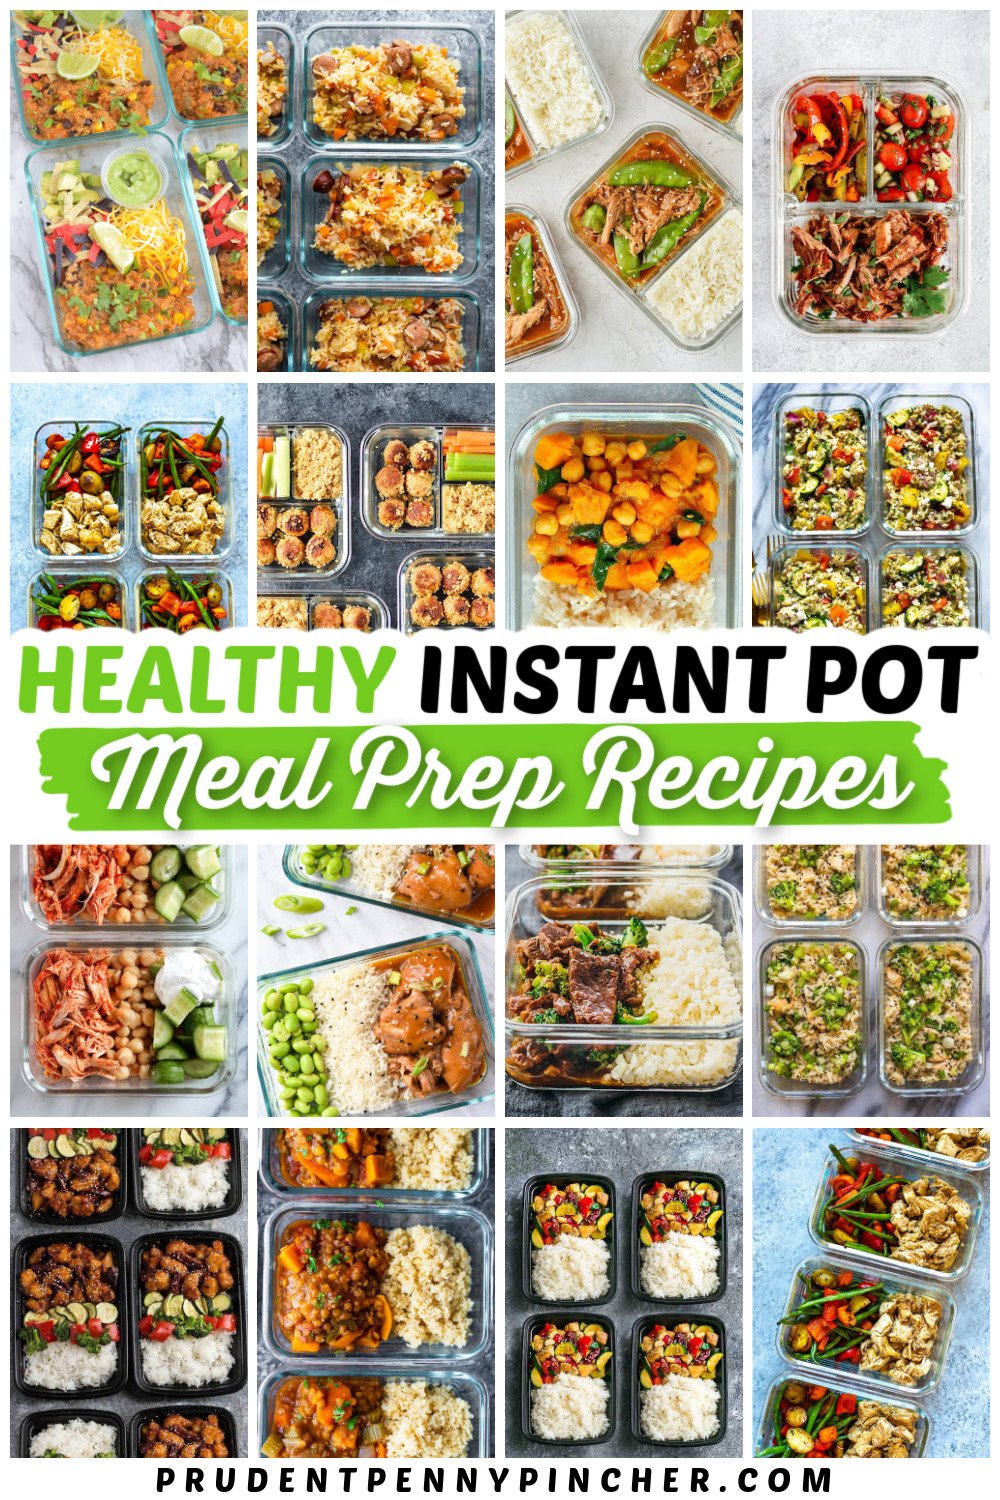 An Ode to My Instant Pot: Lunch Prep Edition